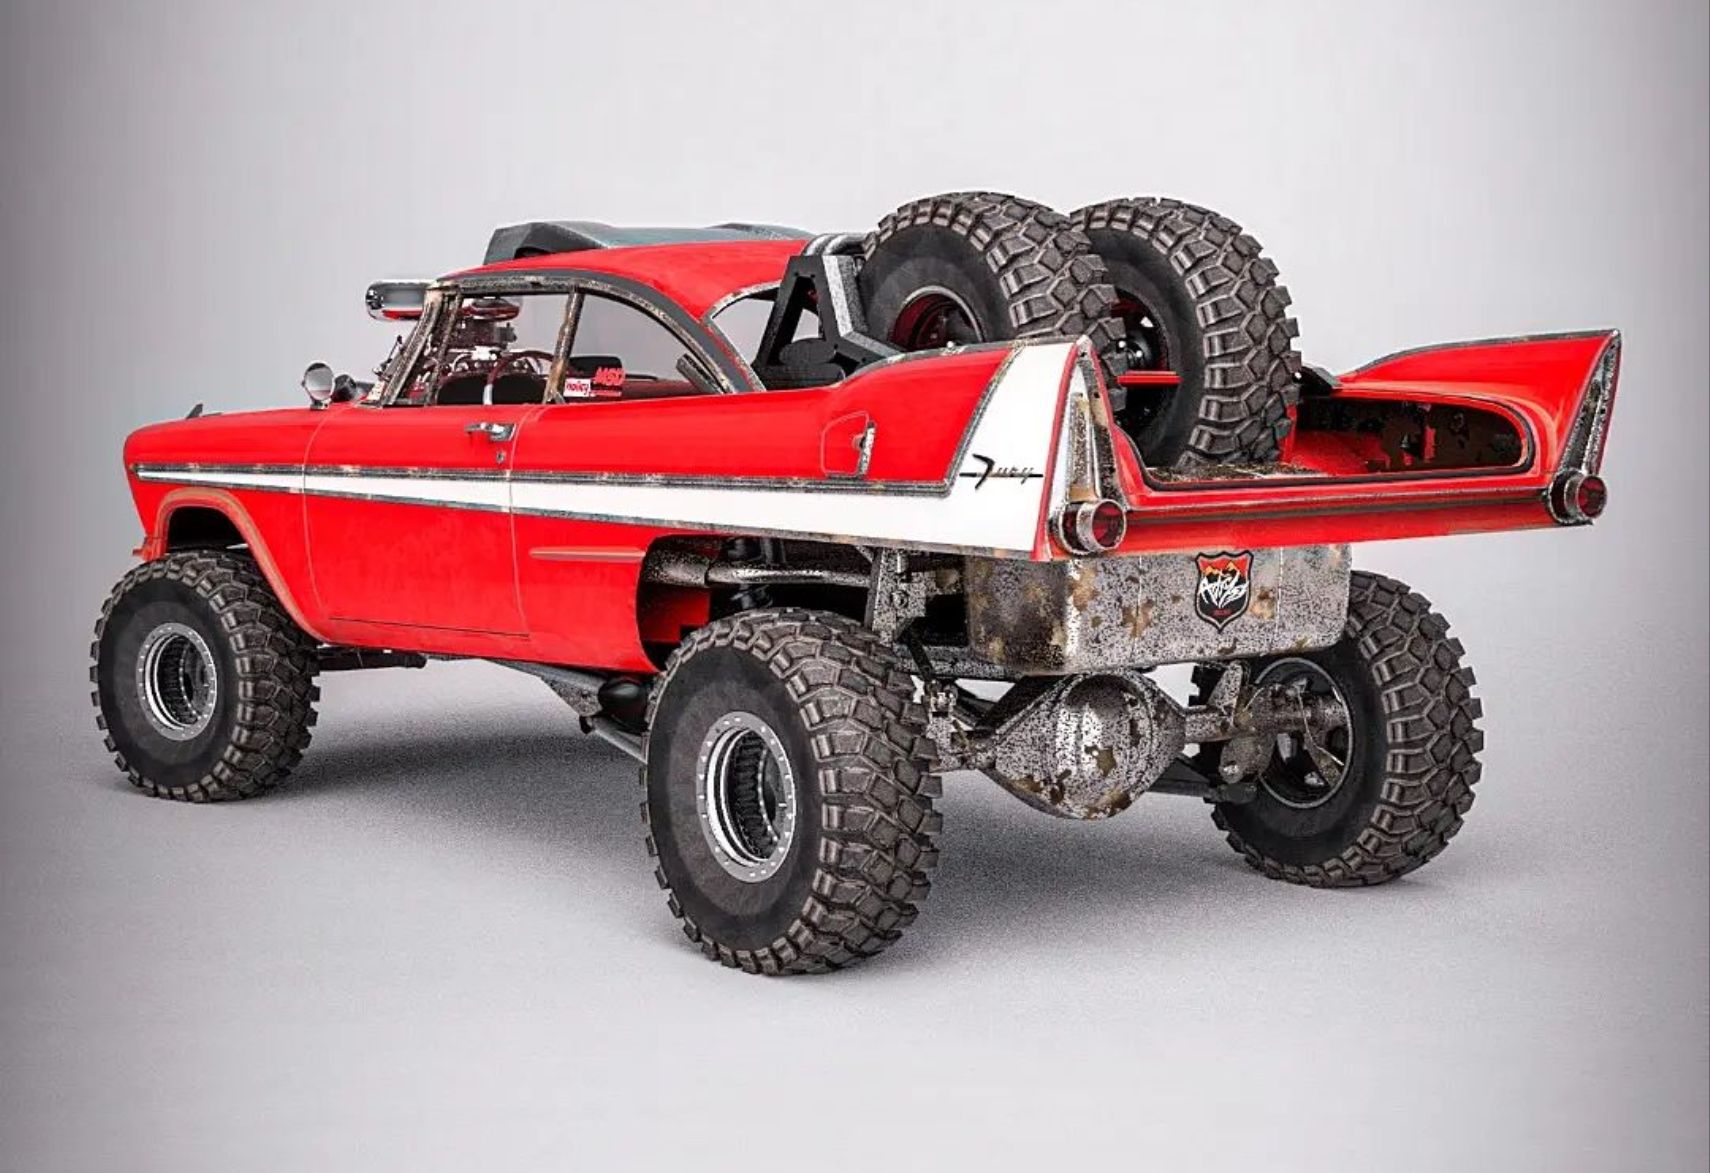 Plymouth Fury Mad Max Rendering Rear Quarter View With Spare Tires